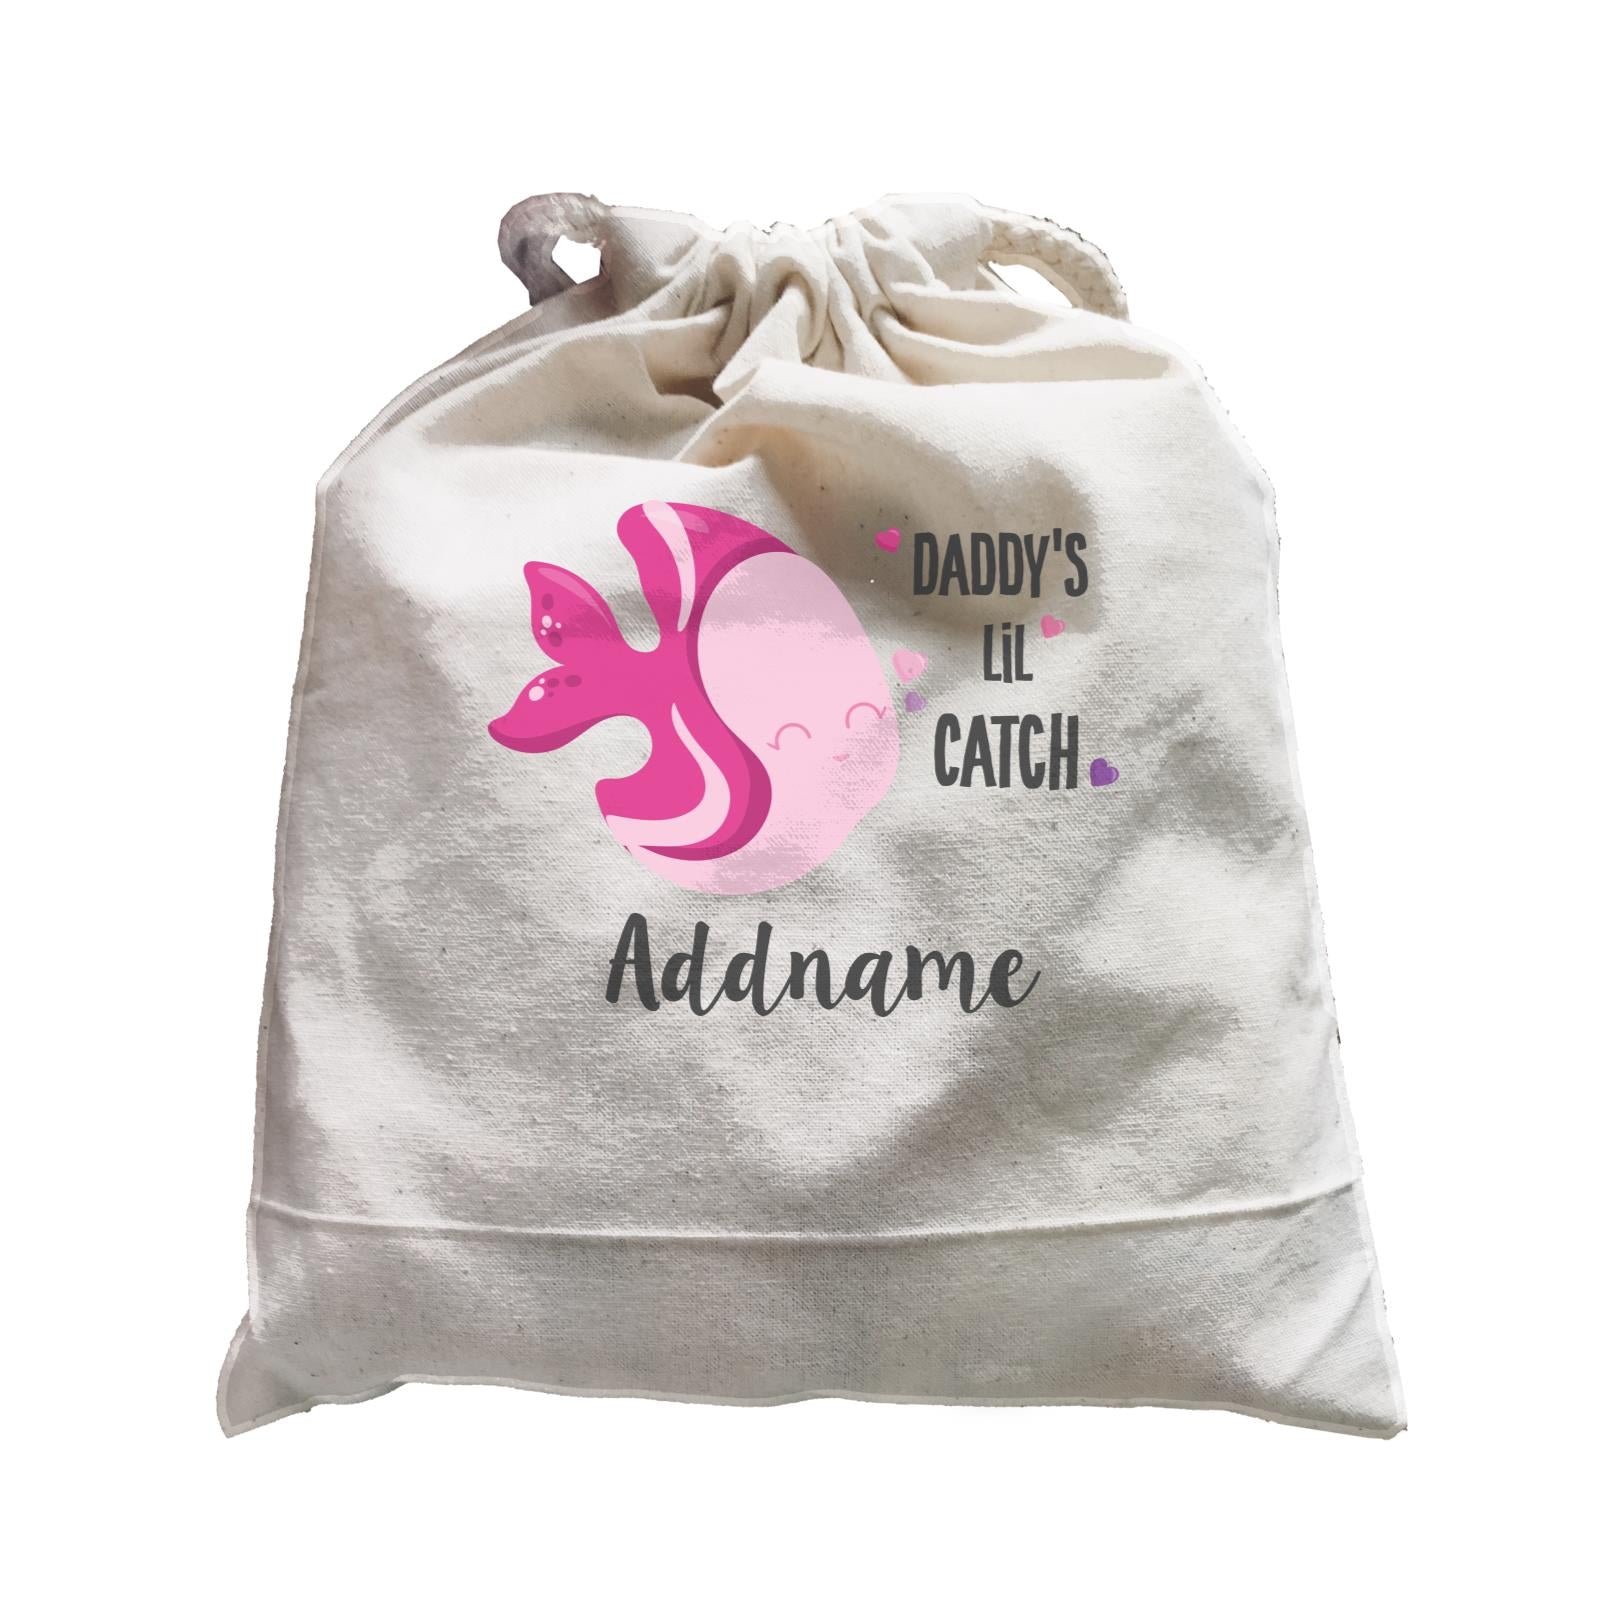 Cute Sea Animals Pink Fish Daddy's Lil Catch Addname Satchel